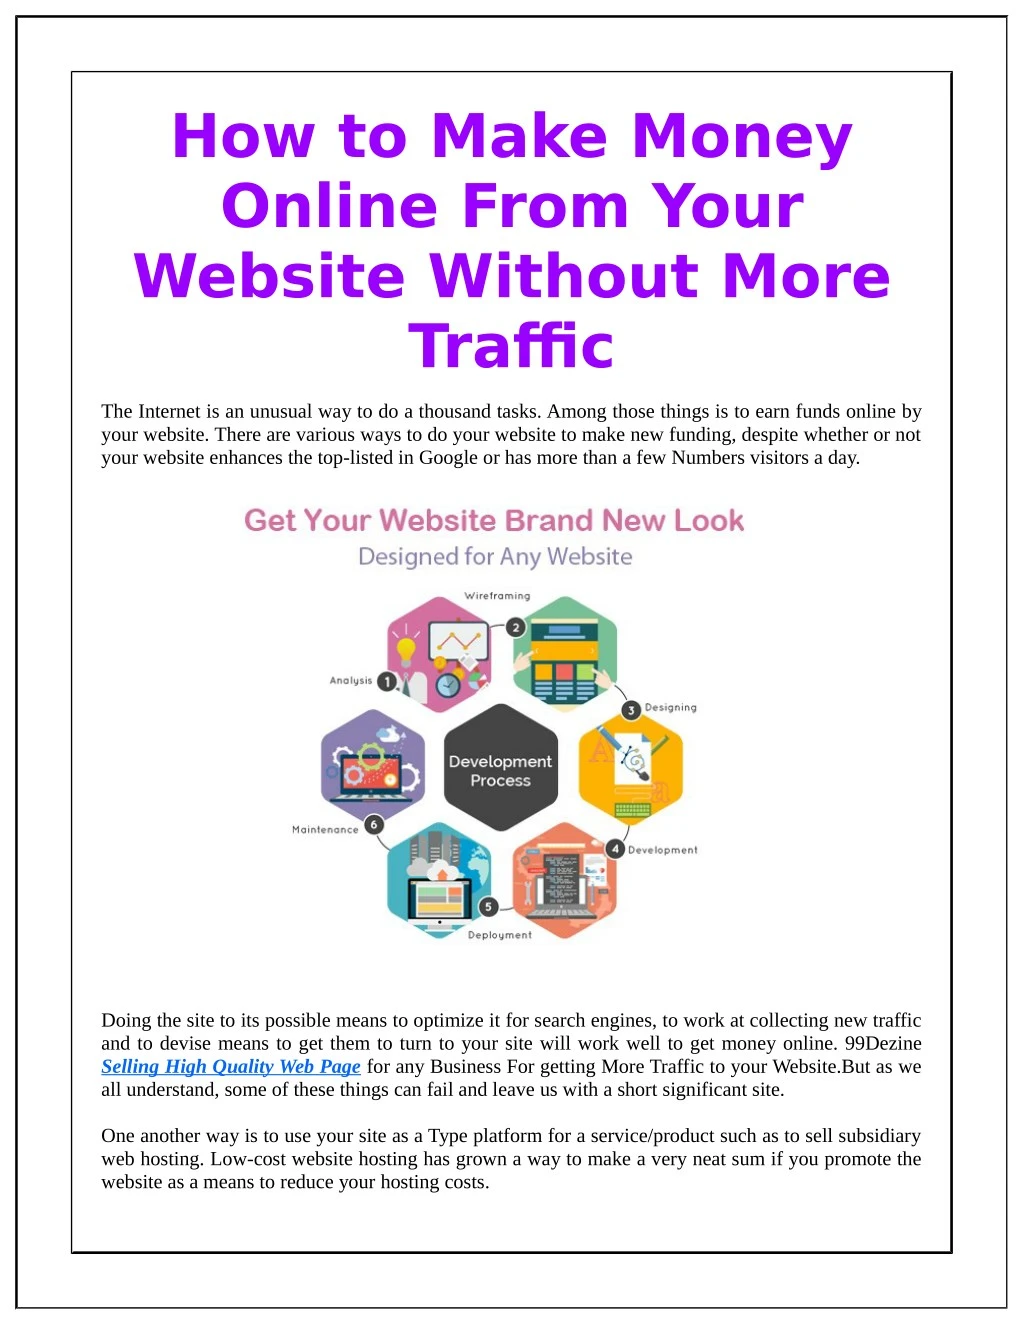 how to make money online from your website